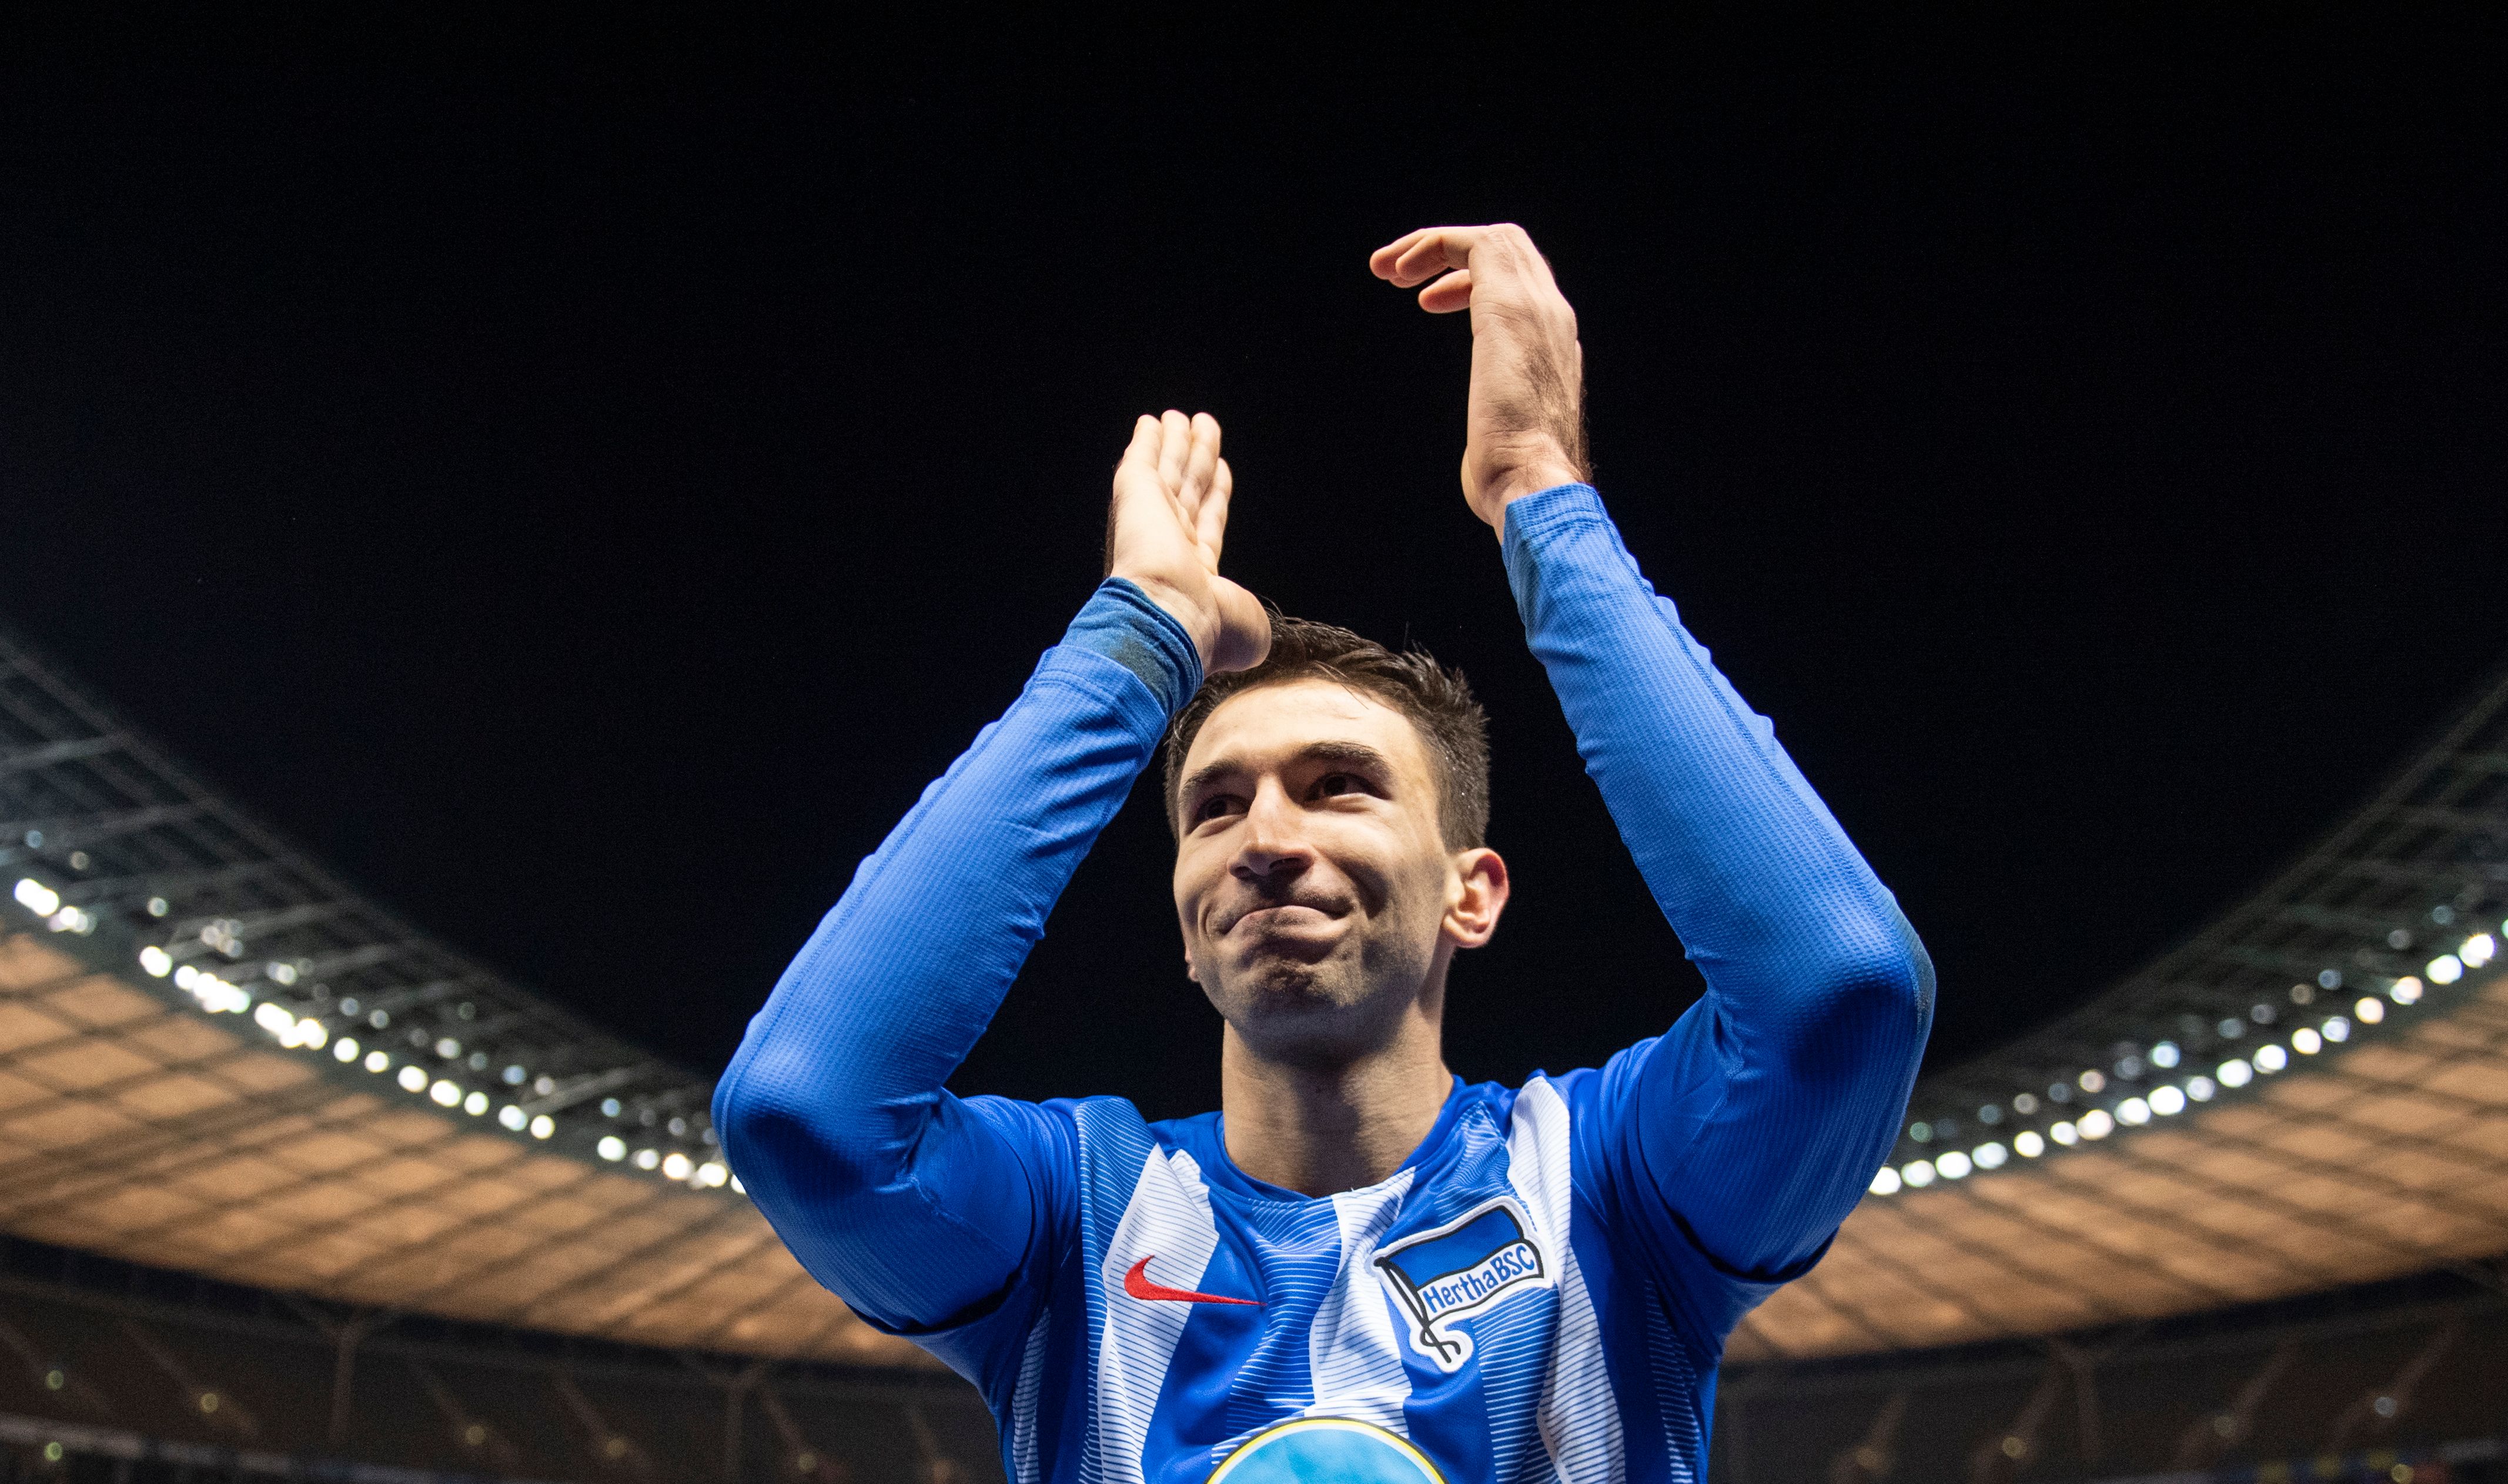 Berlin´s Serbian midfielder Marko Grujic celebrates after winning the German first division Bundesliga football match between Hertha Berlin v Eintracht Frankfurt at the Olympic stadium in Berlin on December 8, 2018. (Photo by ROBERT MICHAEL / AFP) / RESTRICTIONS: DFL REGULATIONS PROHIBIT ANY USE OF PHOTOGRAPHS AS IMAGE SEQUENCES AND/OR QUASI-VIDEO        (Photo credit should read ROBERT MICHAEL/AFP/Getty Images)